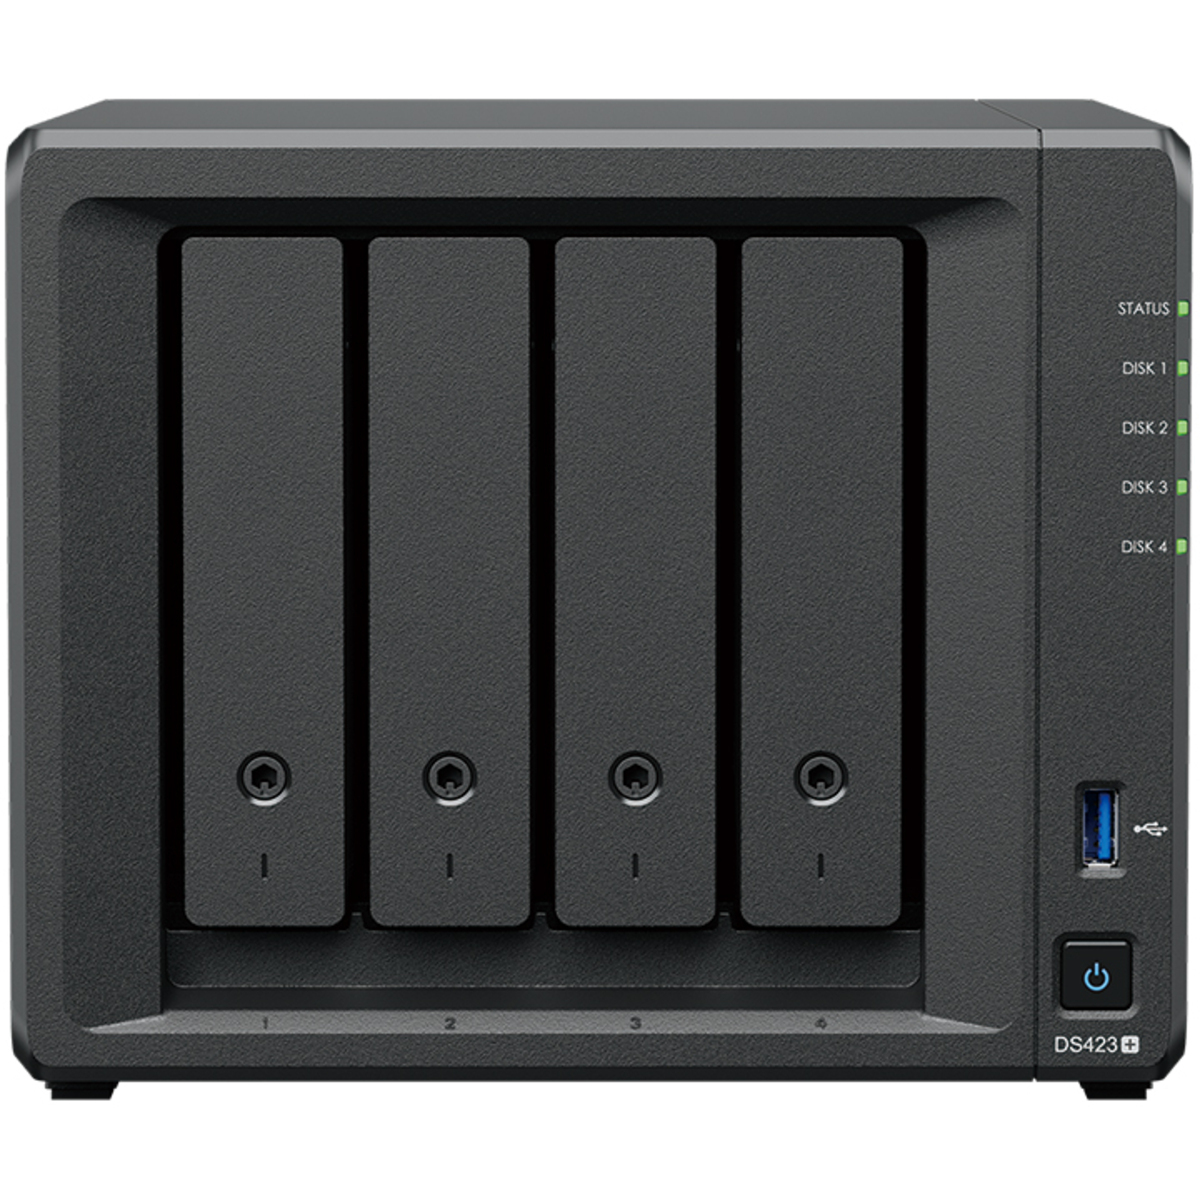 Synology DiskStation DS423+ 96tb 4-Bay Desktop Multimedia / Power User / Business NAS - Network Attached Storage Device 4x24tb Seagate EXOS X24 ST24000NM002H 3.5 7200rpm SATA 6Gb/s HDD ENTERPRISE Class Drives Installed - Burn-In Tested - FREE RAM UPGRADE DiskStation DS423+